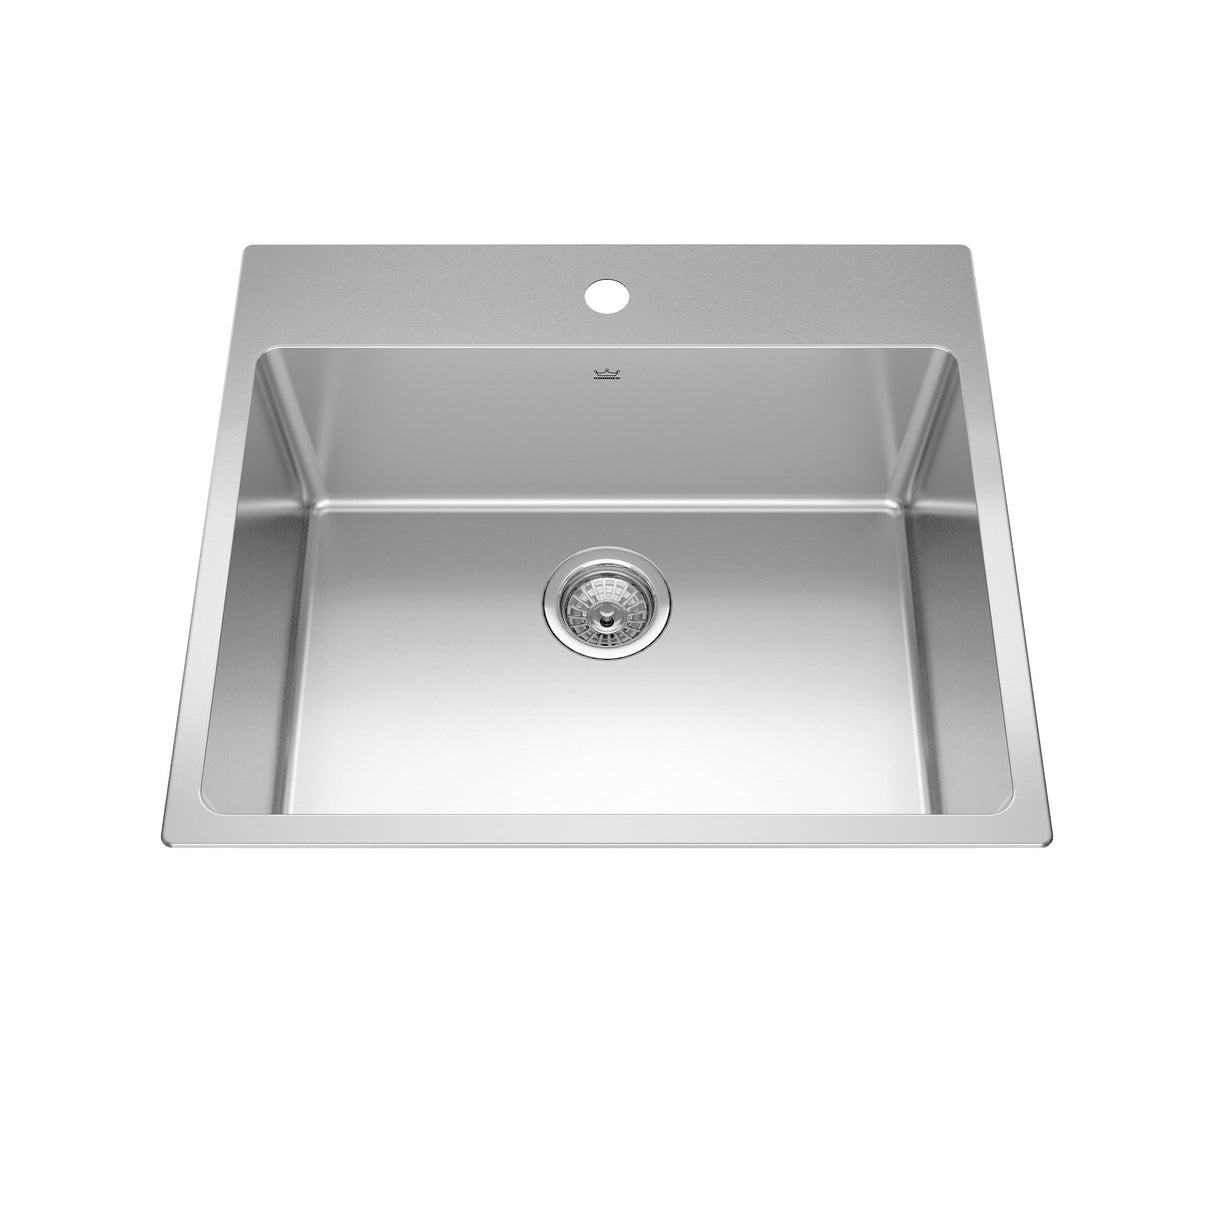 KINDRED BSL2225-ADA-1N Brookmore 25.1-in LR x 22.1-in FB x 5.4-in DP Drop in Single Bowl Stainless Steel ADA Kitchen Sink